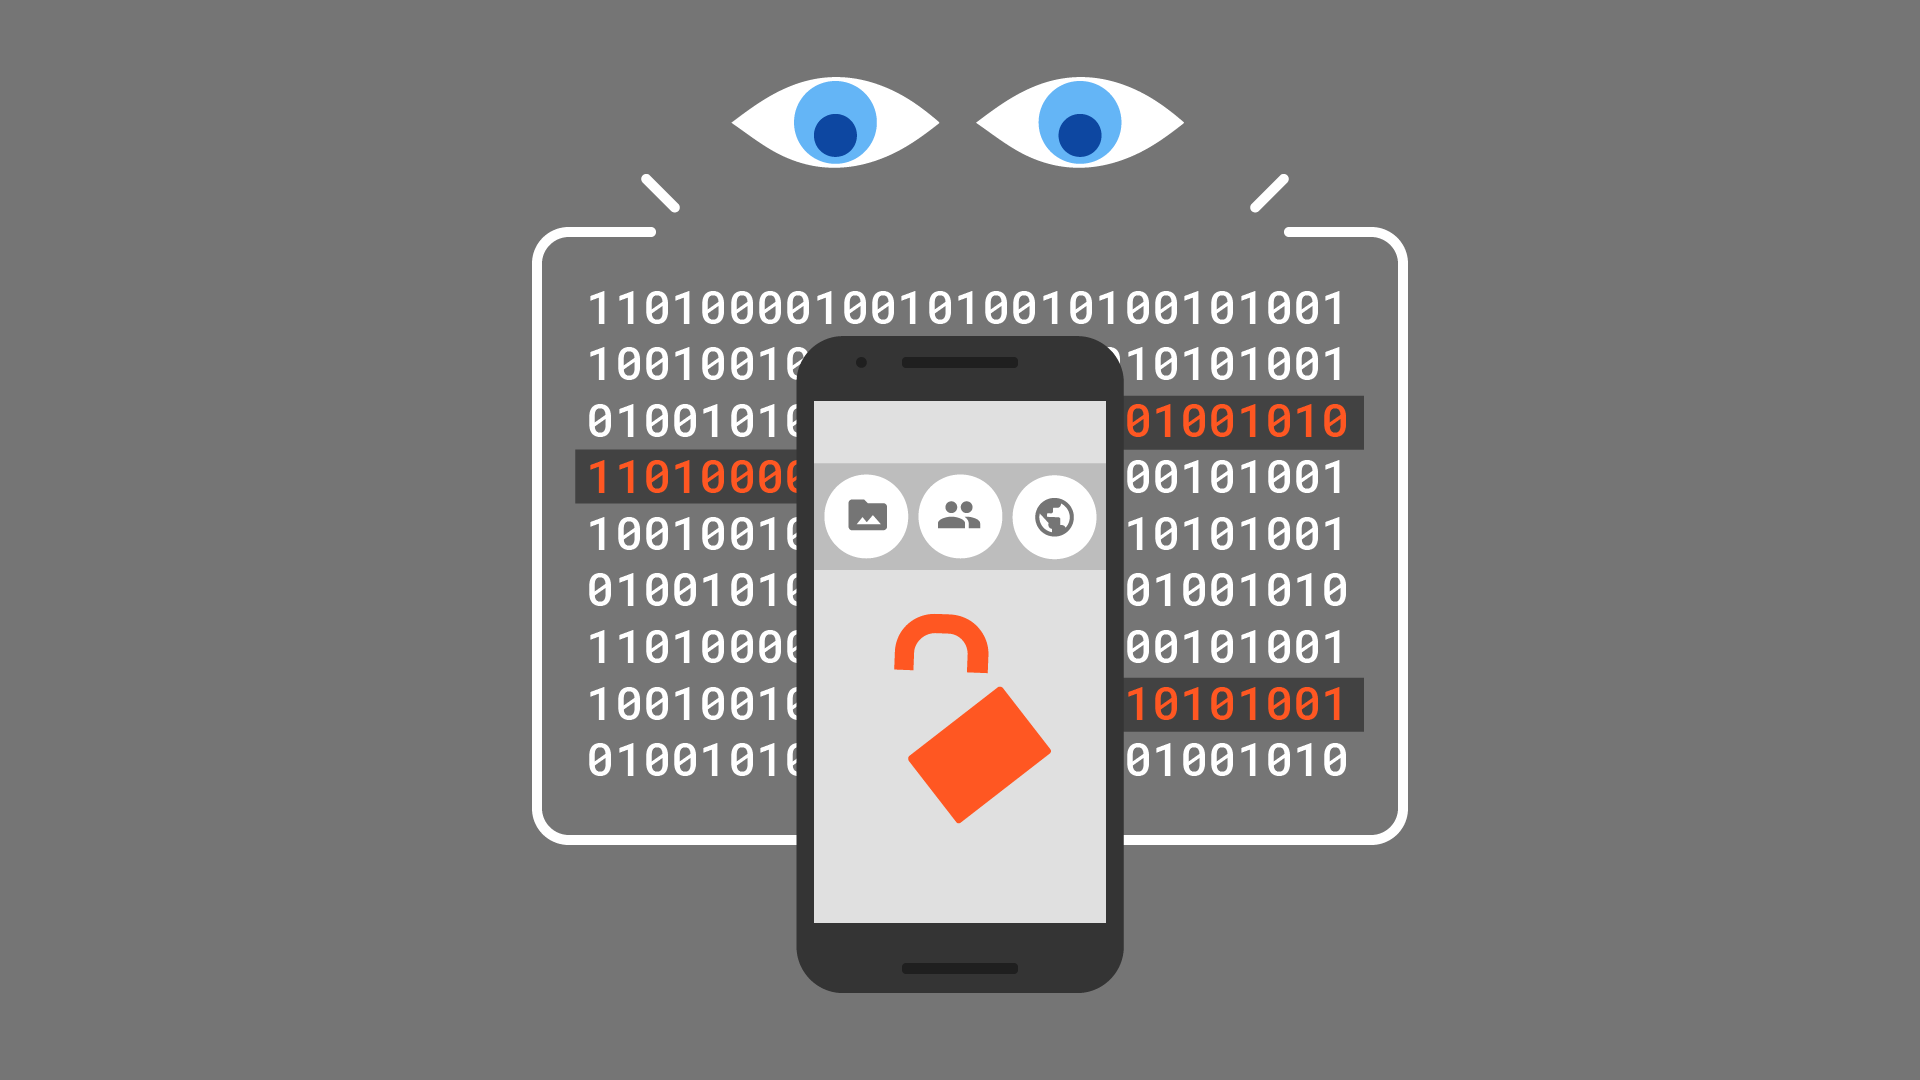 Illustration of mobile security